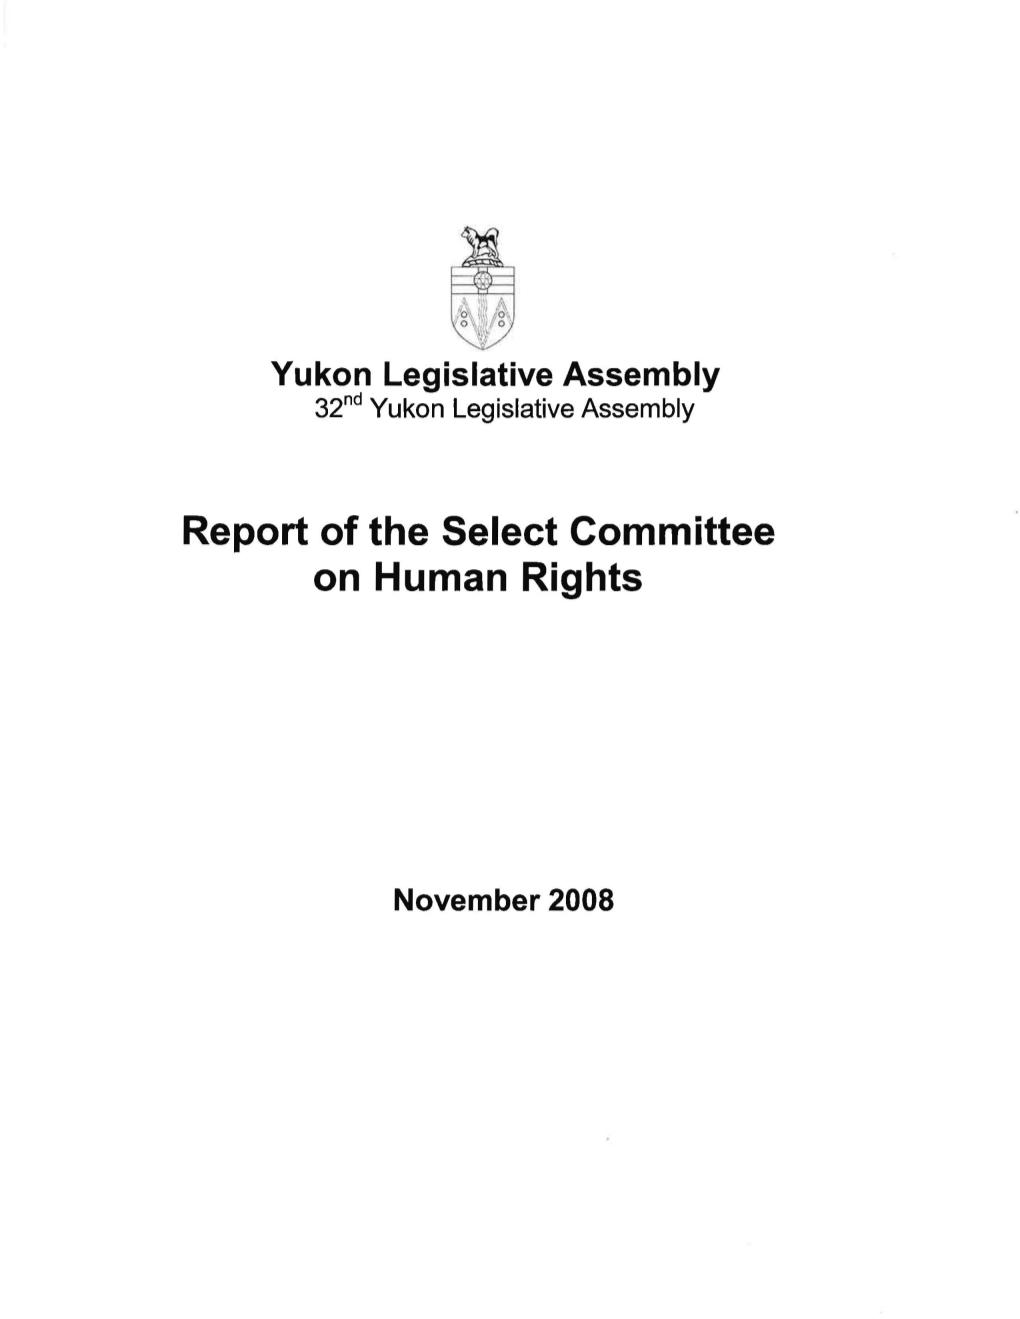 Report of the Select Committee on Human Rights (November 2008)